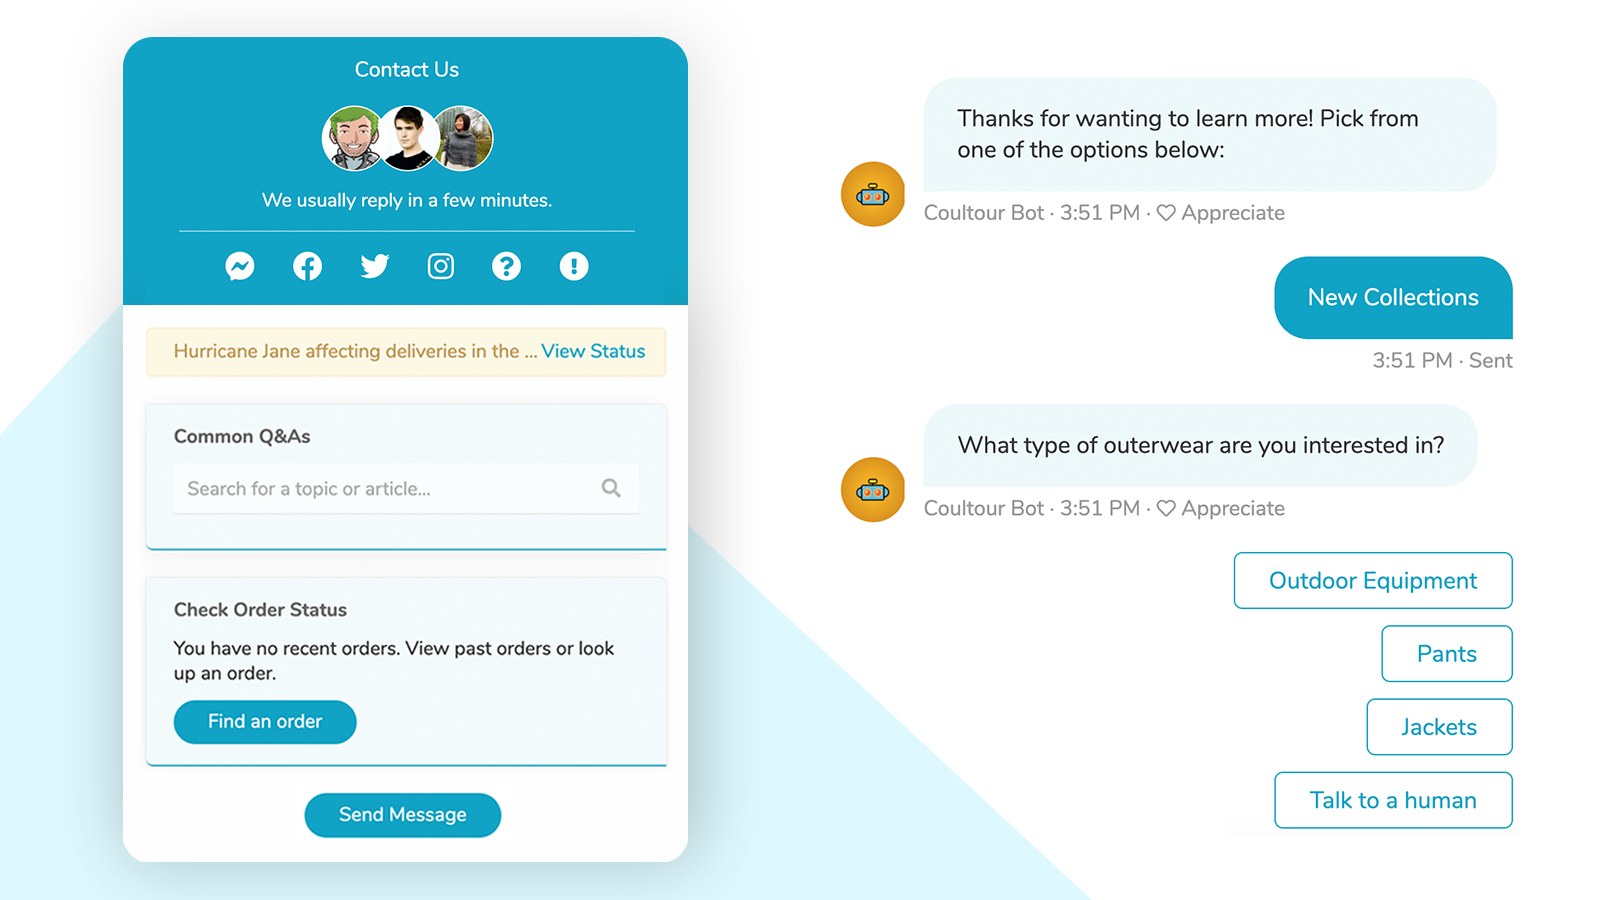 4. Re amaze Live Chat & Helpdesk by Re amaze